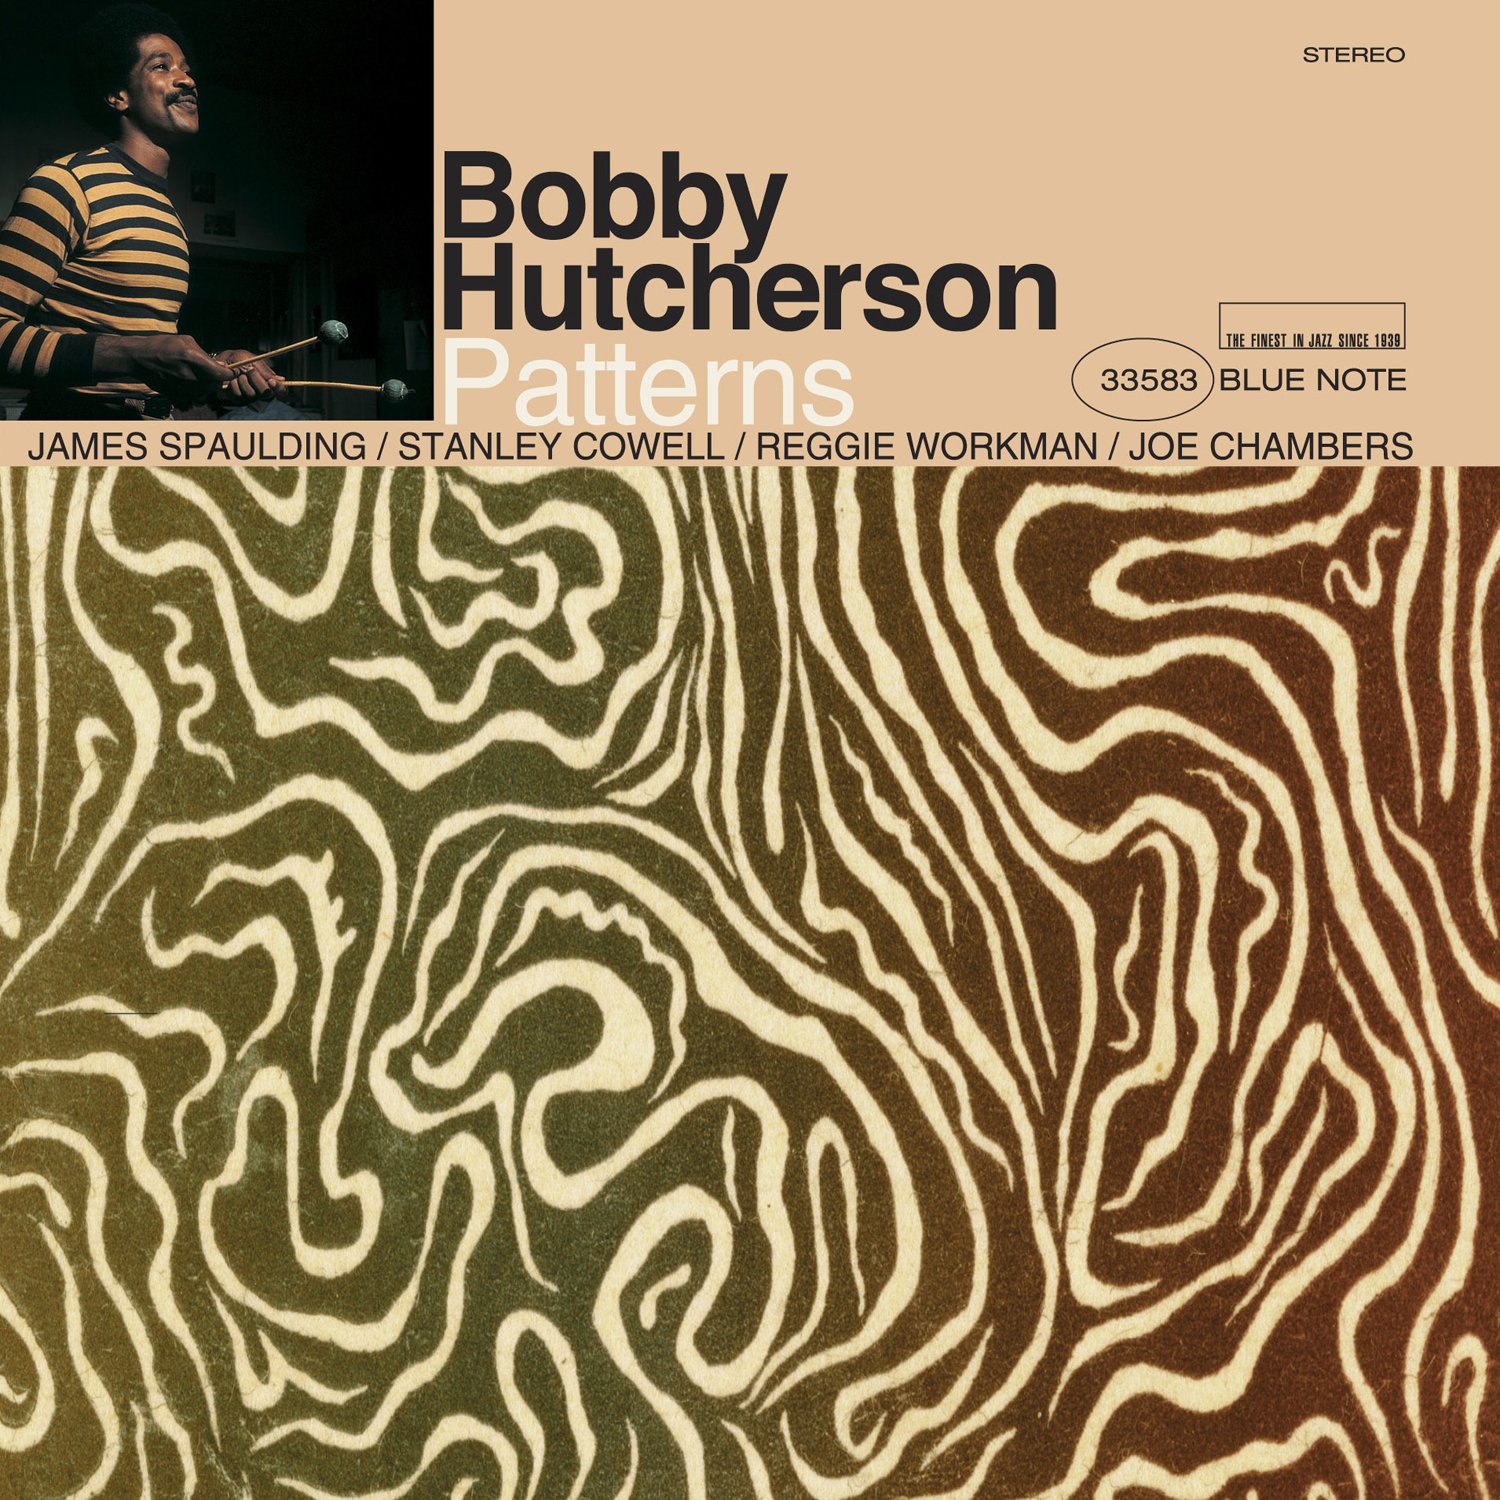 Blue Note Records on Twitter: "Lots more Blue Note catalog now available digitally to stream/download including #BobbyHutcherson “Patterns” (1968): https://t.co/gqs0FTbNpp now available: Benny Green “Lineage” Benny Green “The Place To Be”